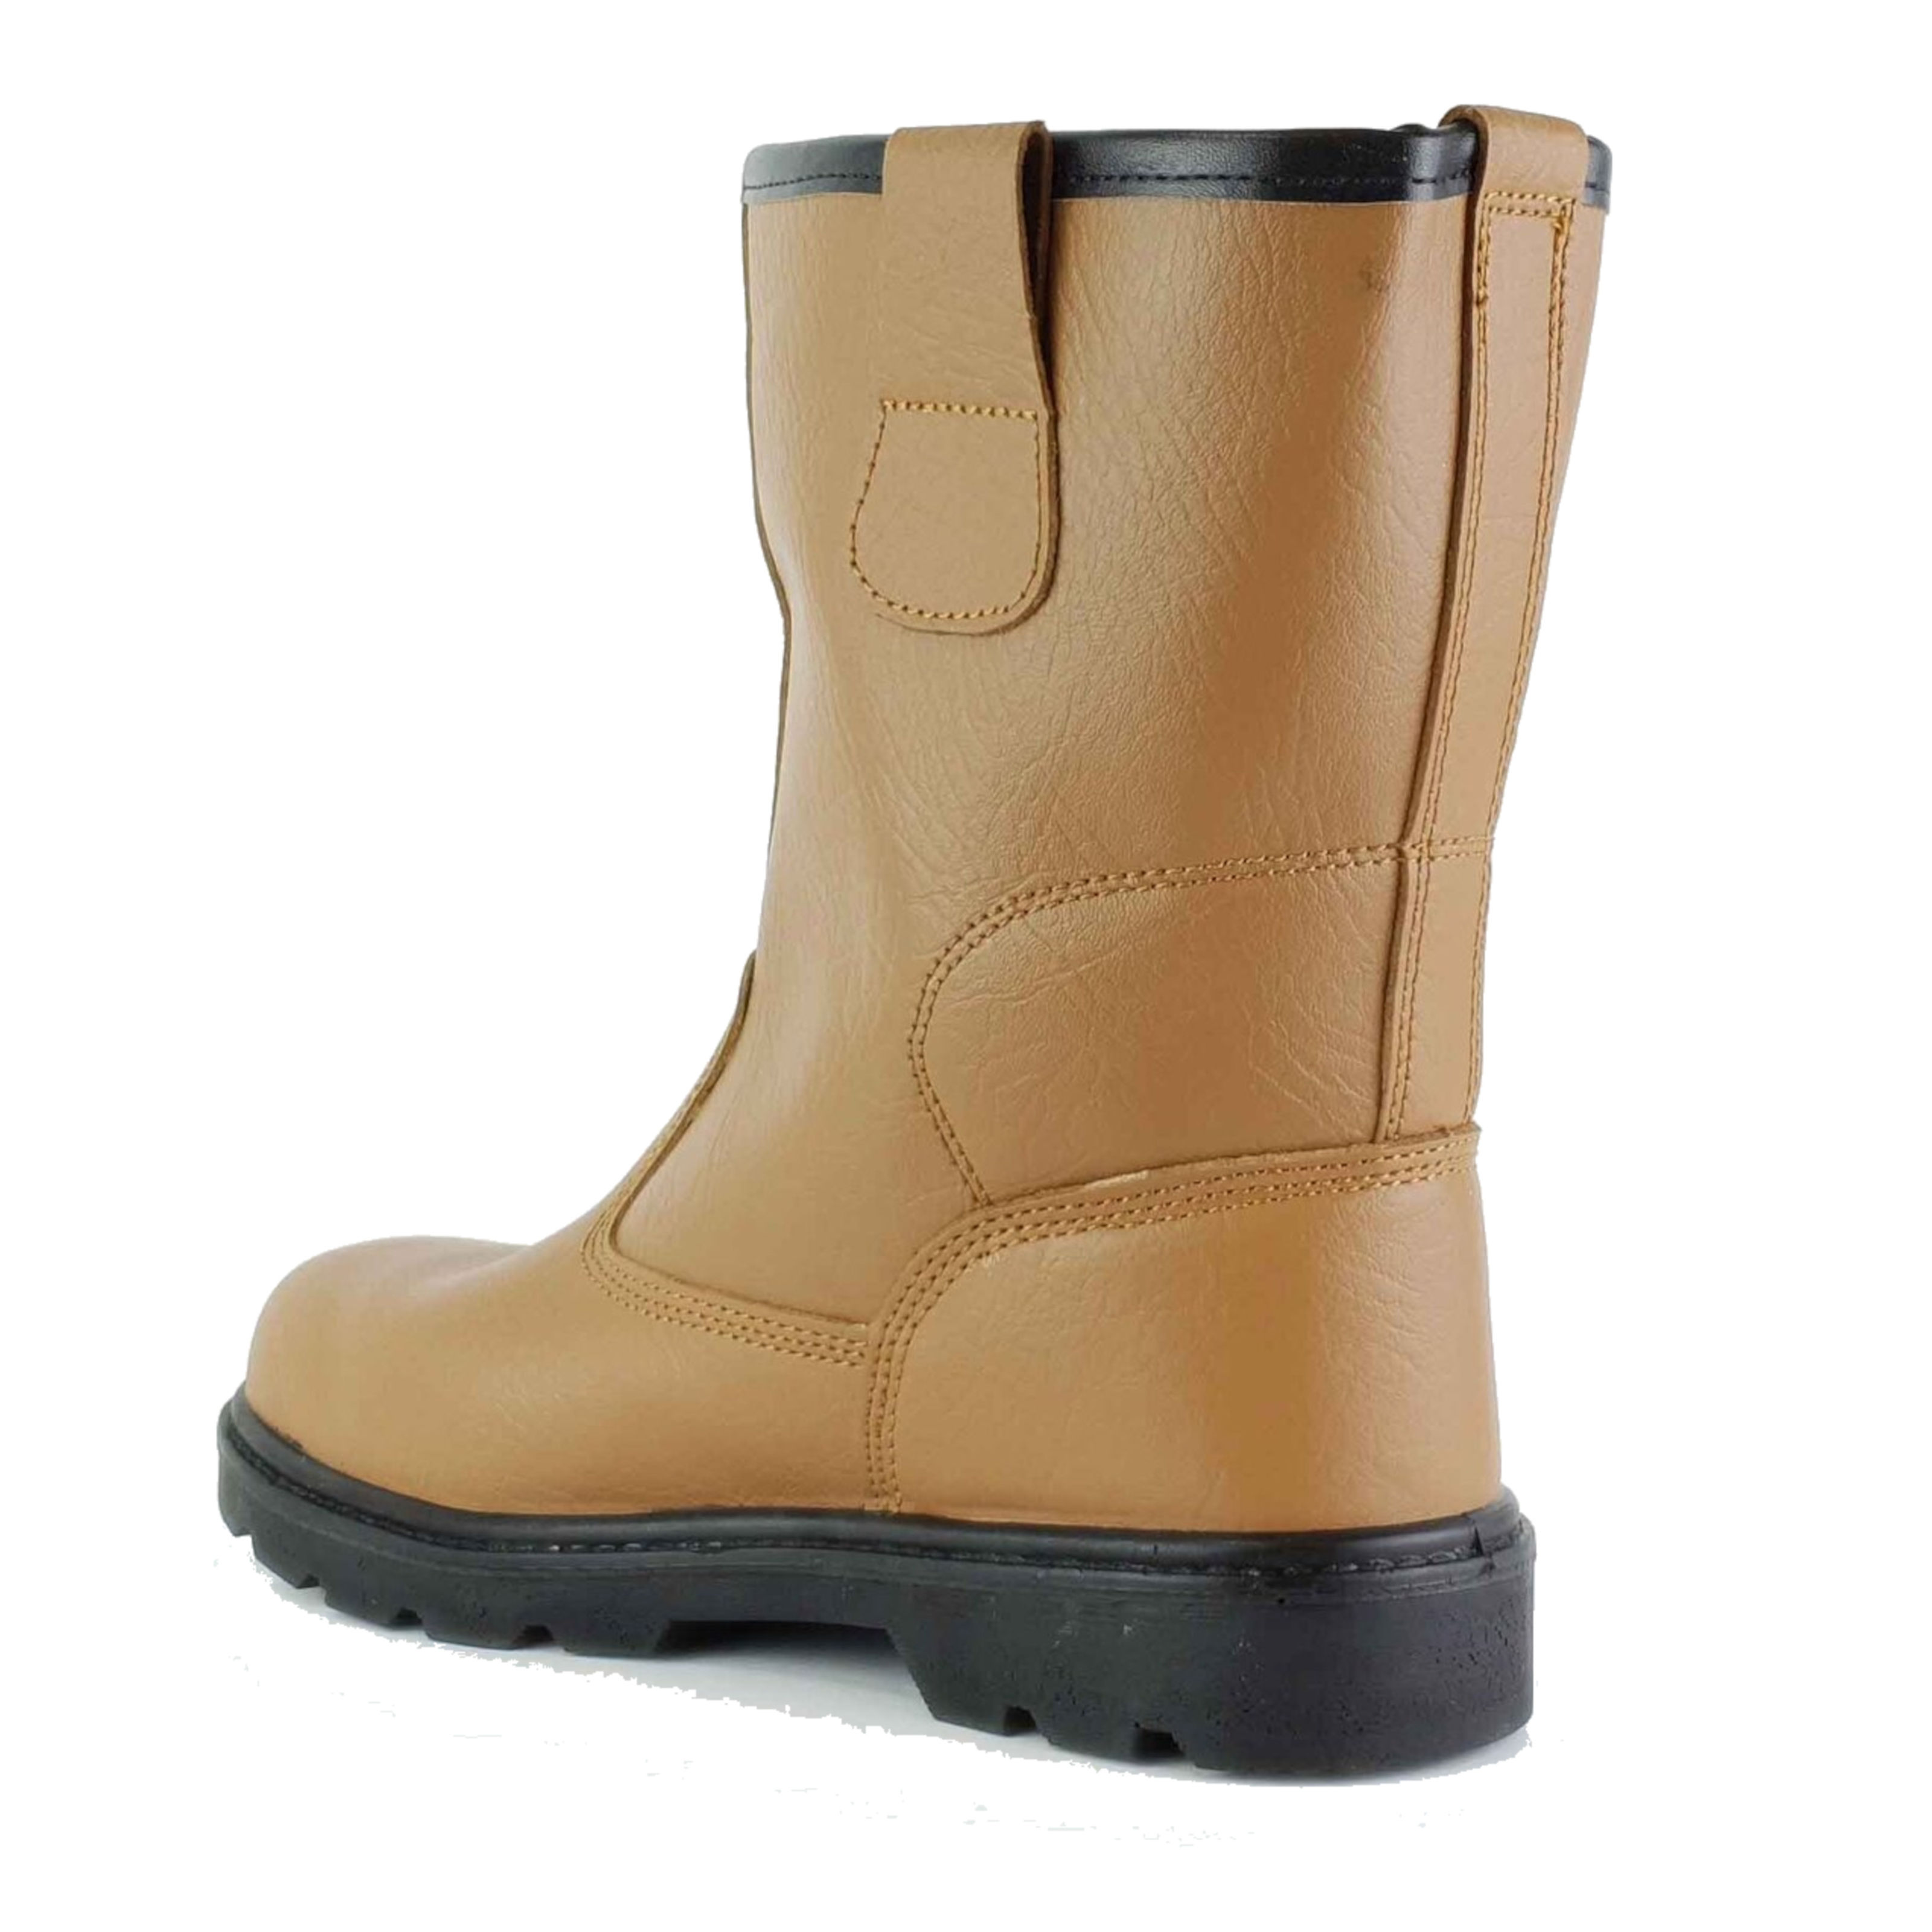 Tuffking 9050 S1P Mens Tan Fur Lined Steel Toe Cap Rigger Safety Boots Work Boot 